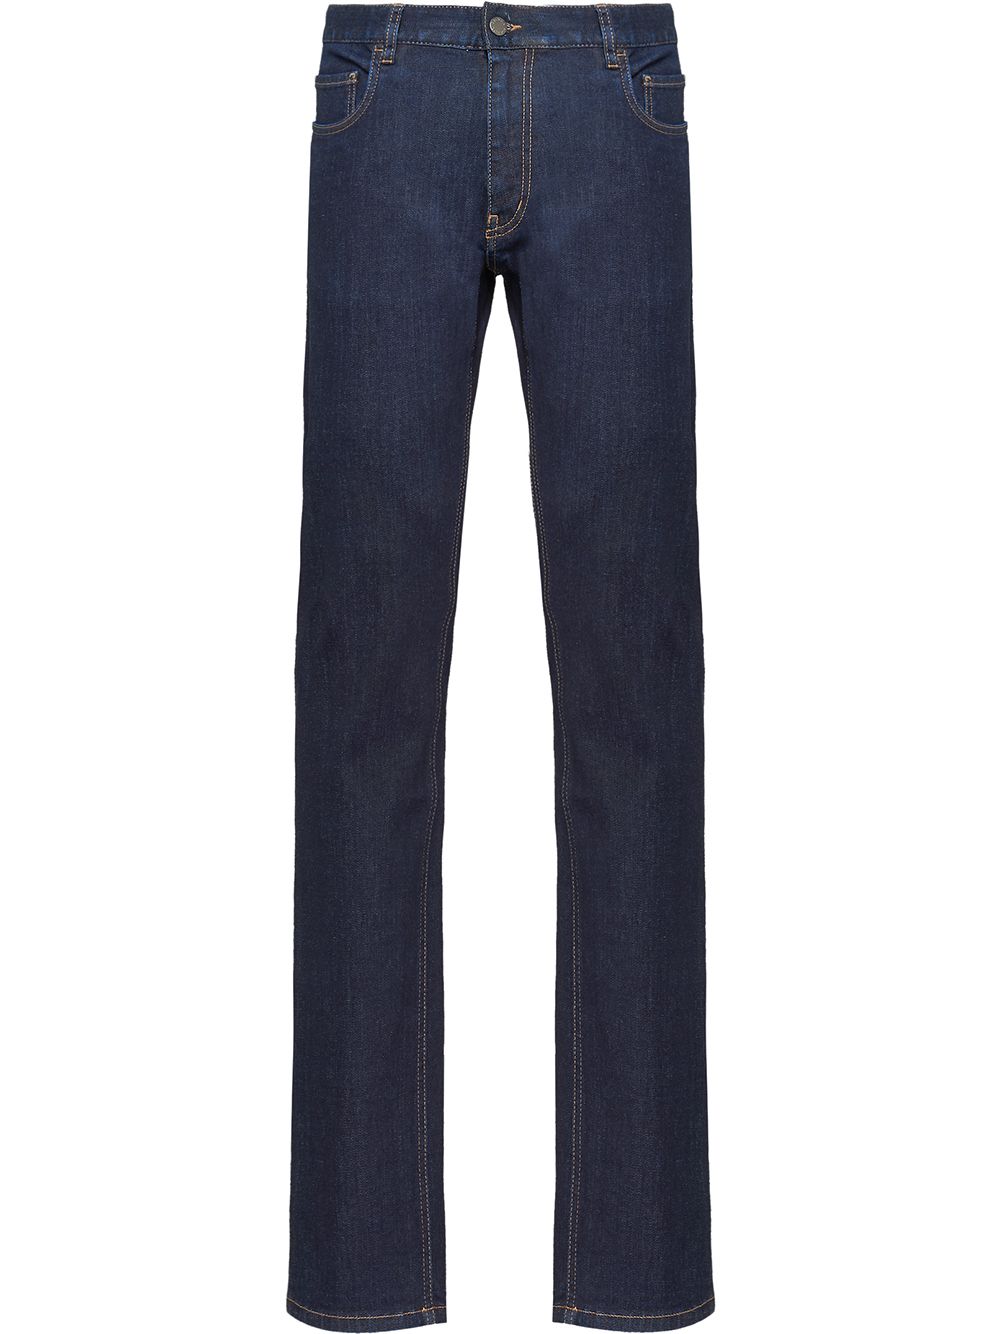 PRADA WASHED EFFECT STRAIGHT JEANS